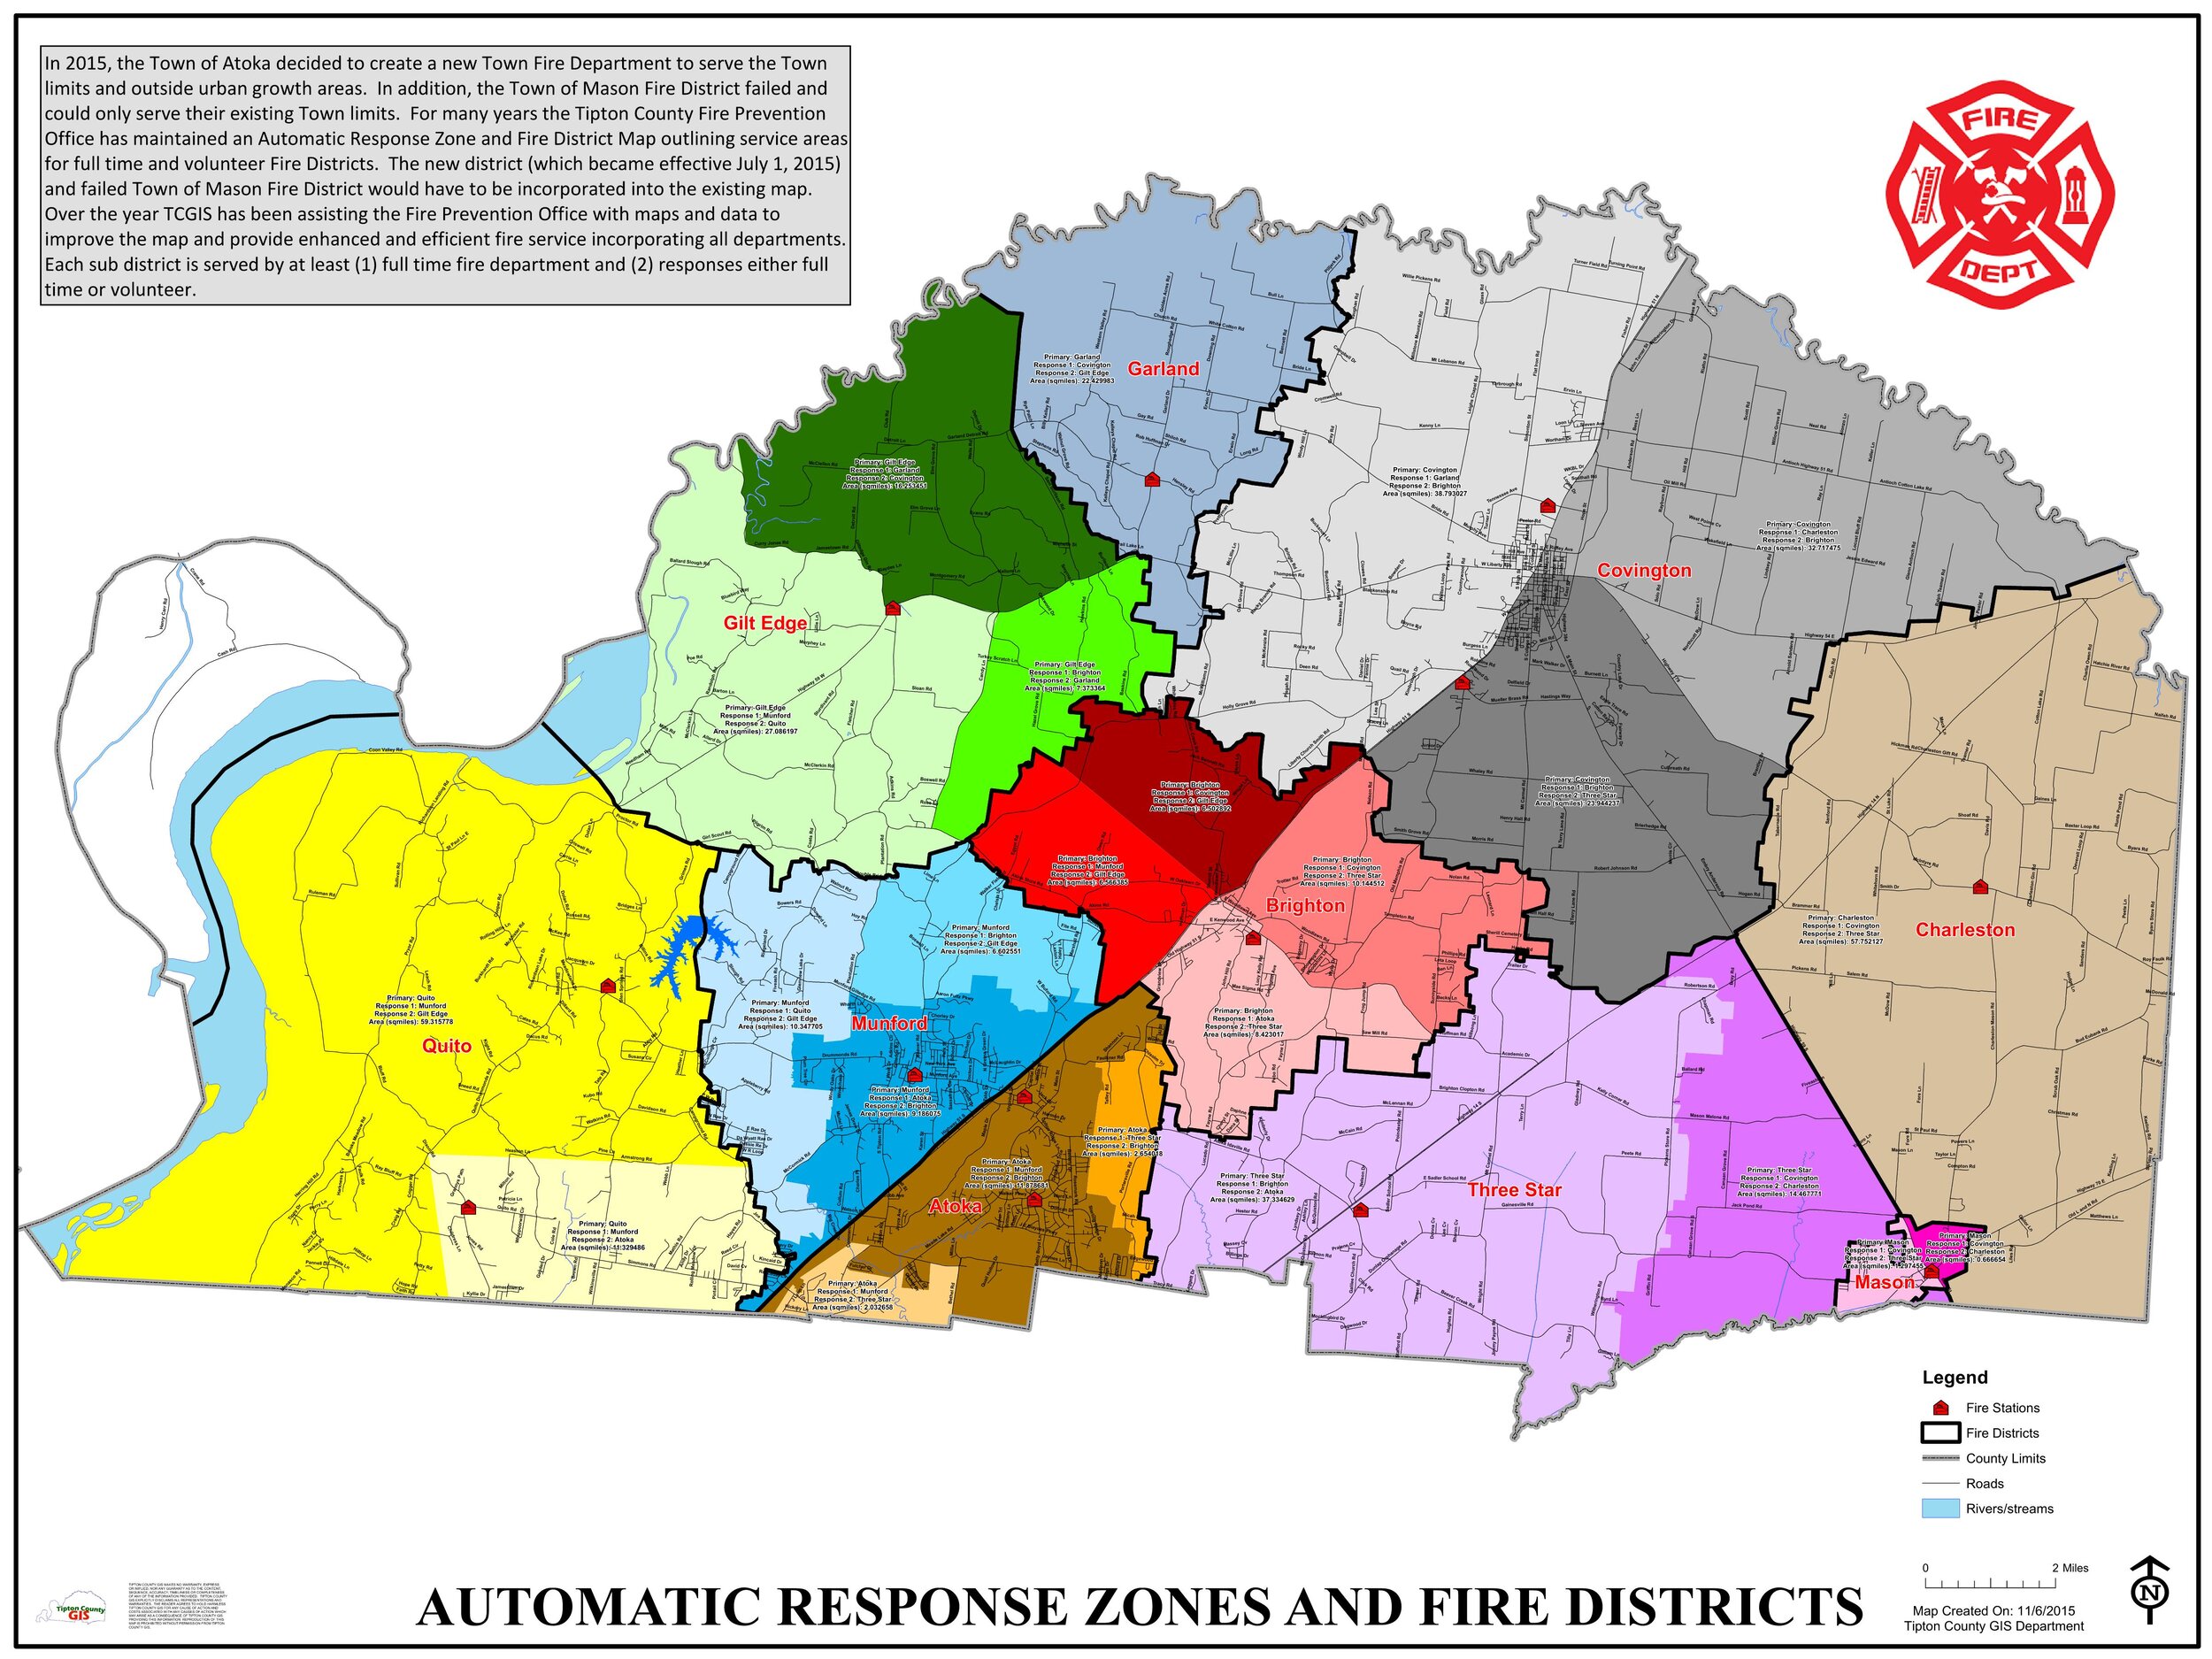 Automatic Response Zones and Fire Districts